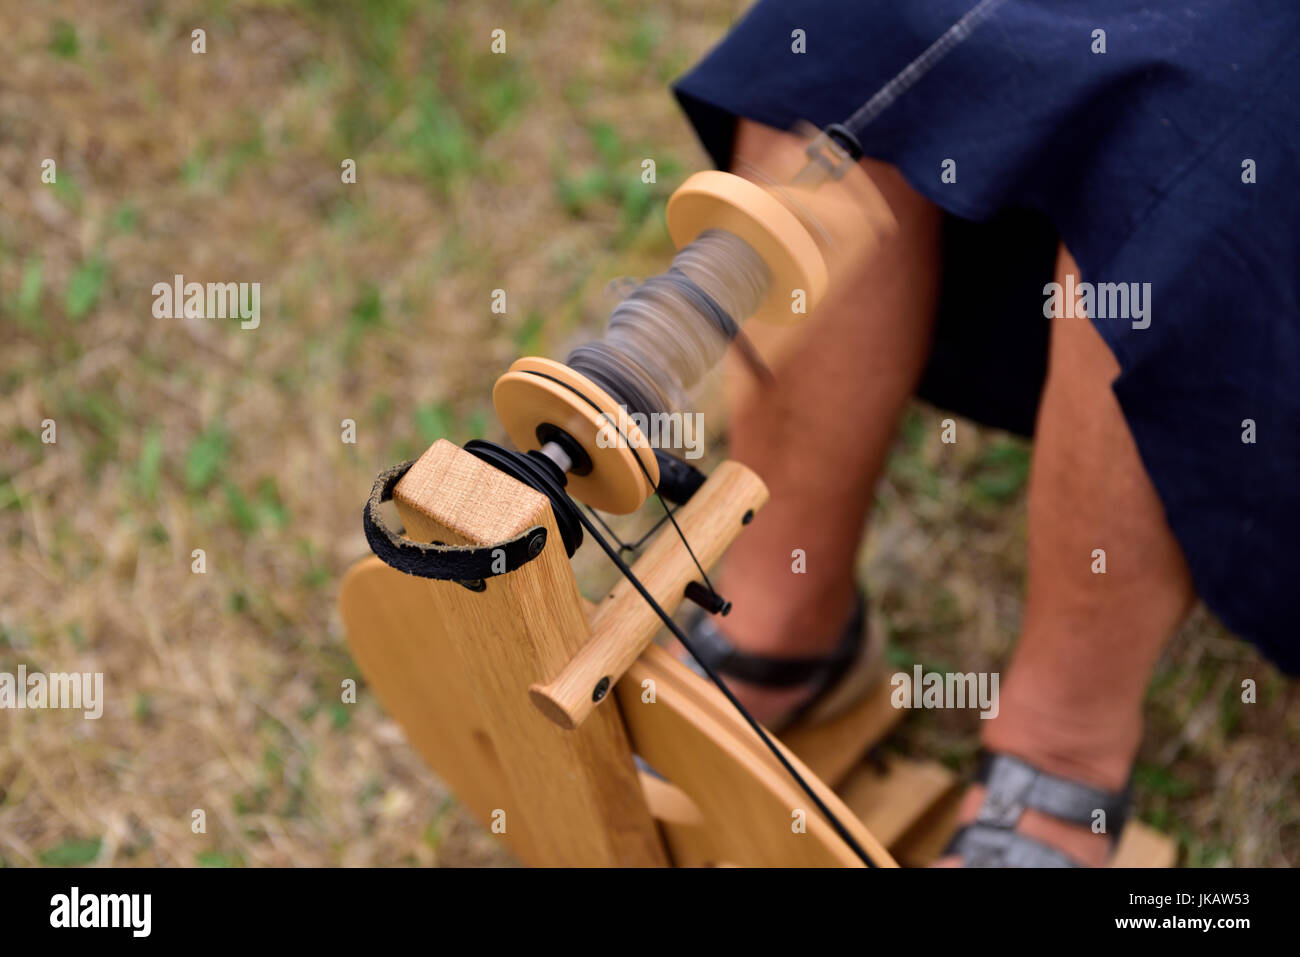 Close-up of thread going on spinning wheel bobbin with motion blur Stock Photo